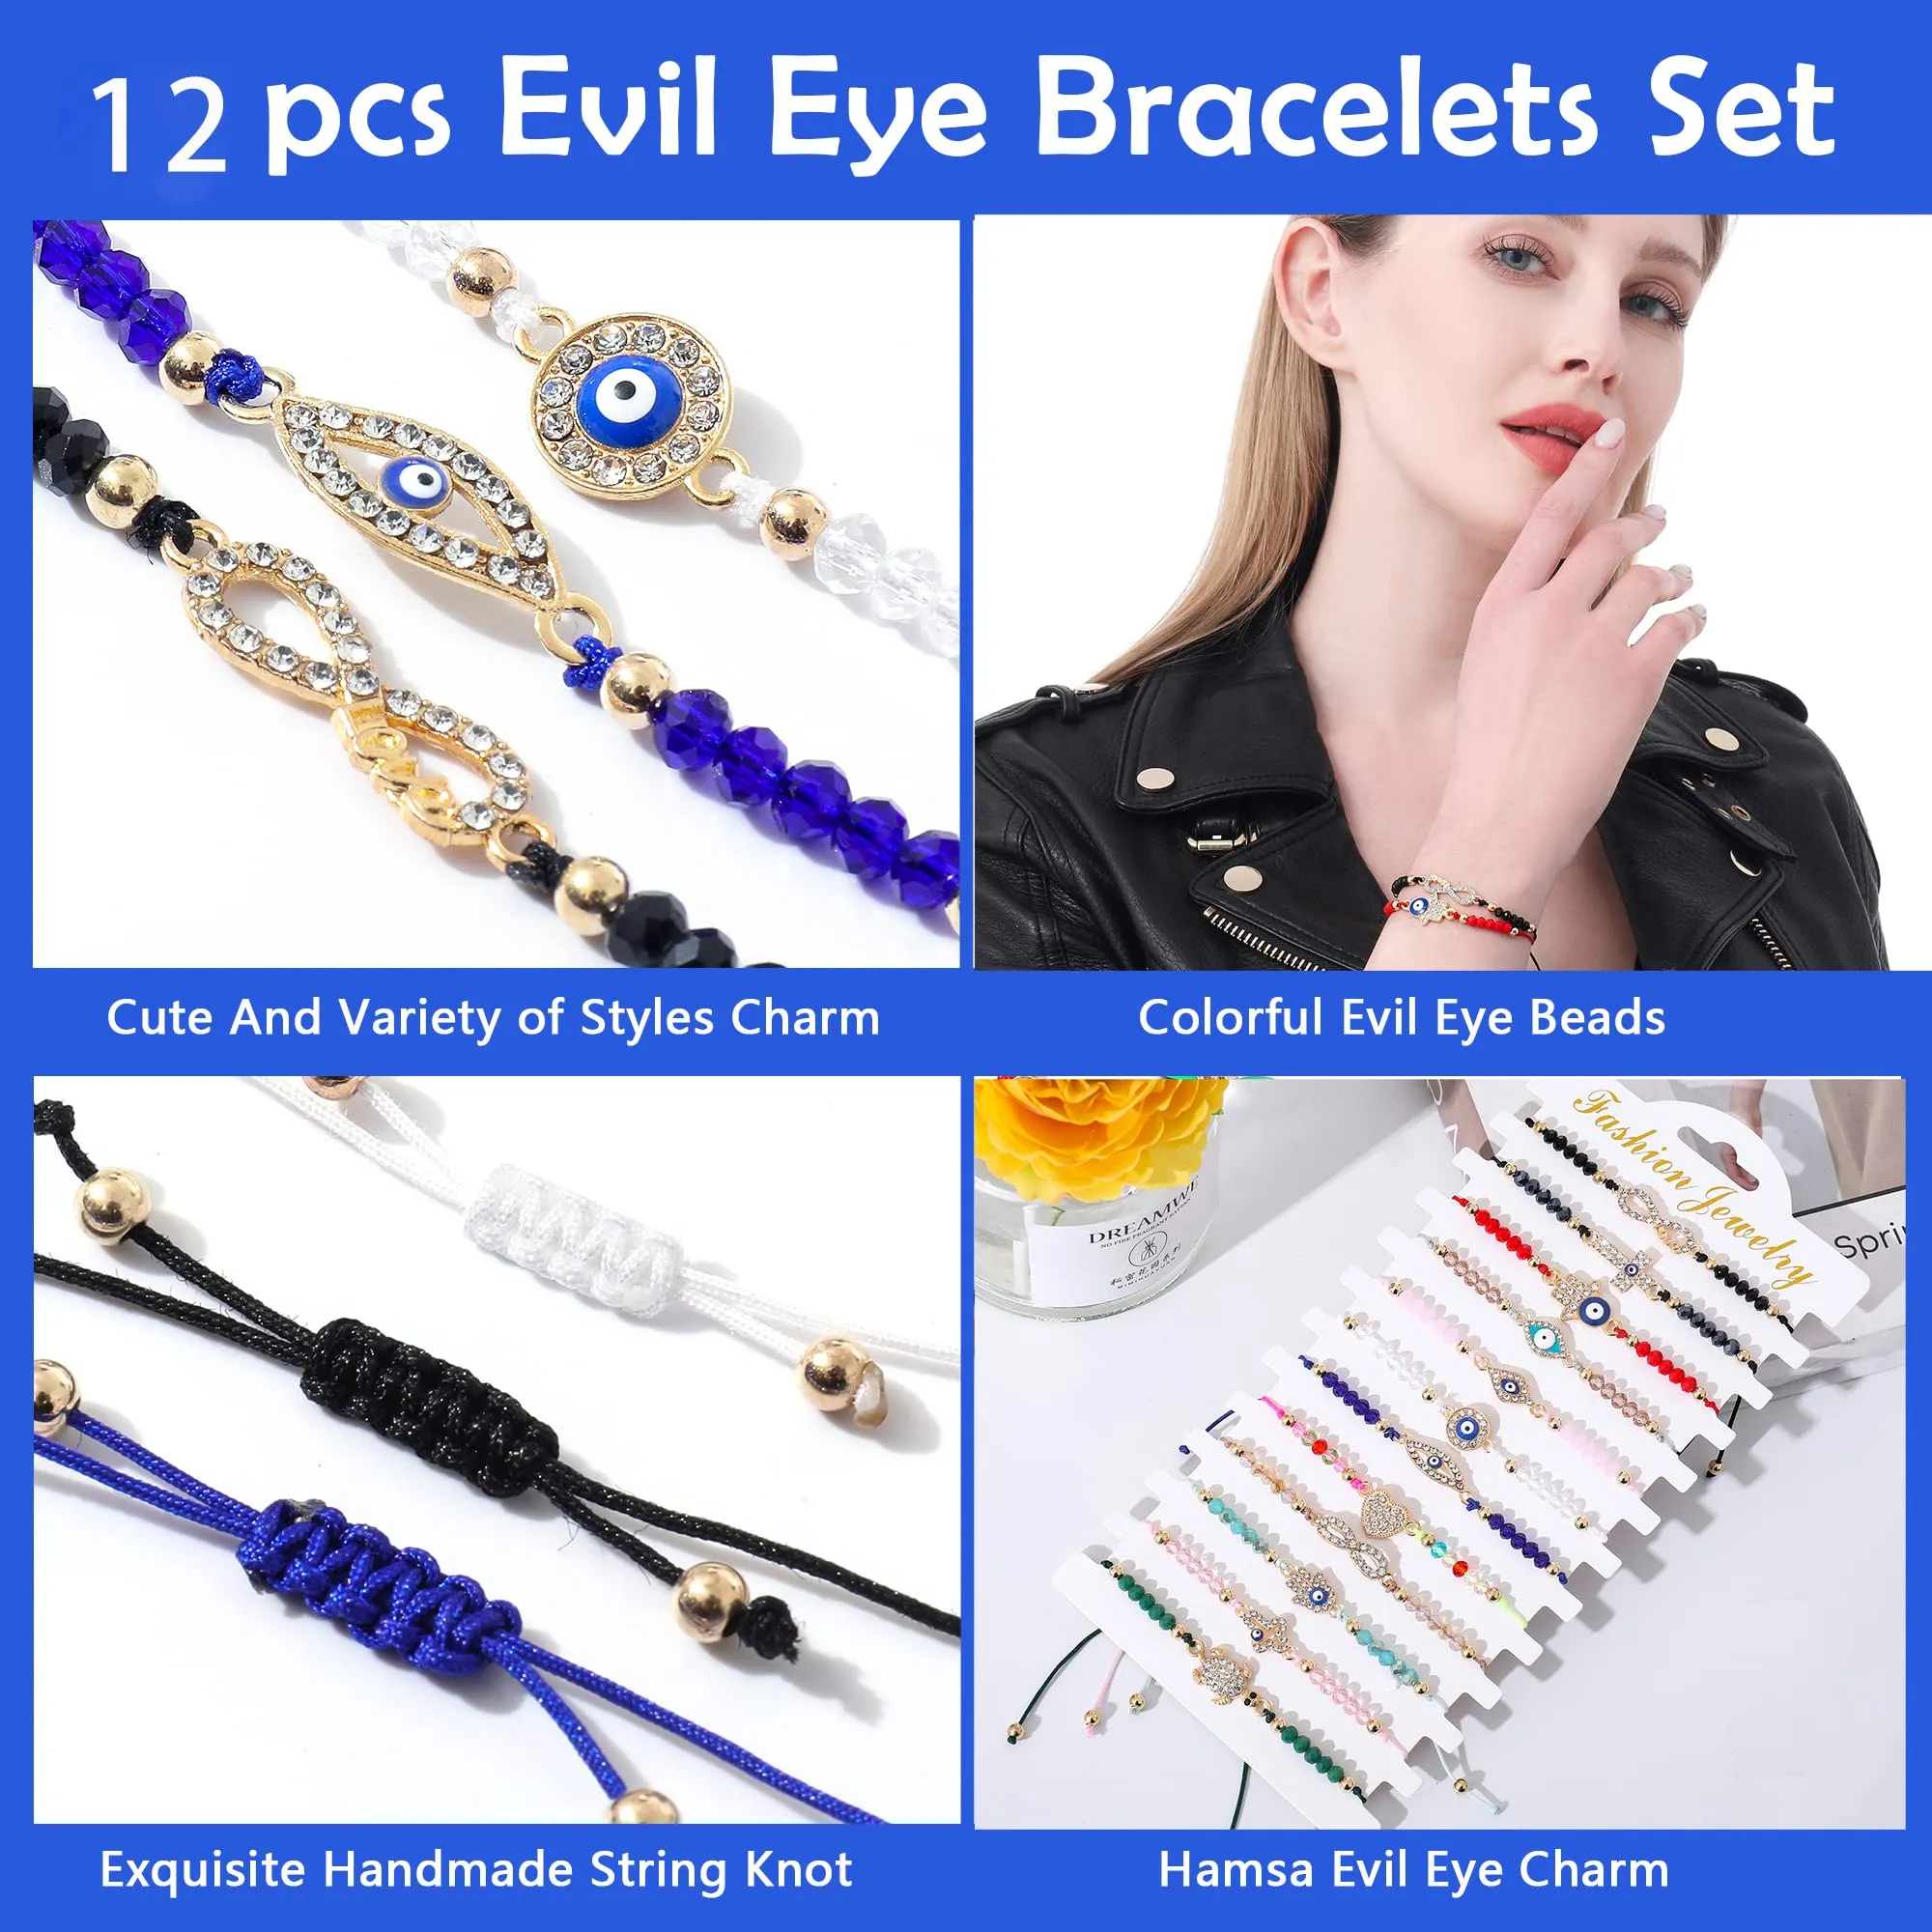 24/ evil eye bracelets pack for women girls boys mexican braclets set protection amulet anklets jewelry gift